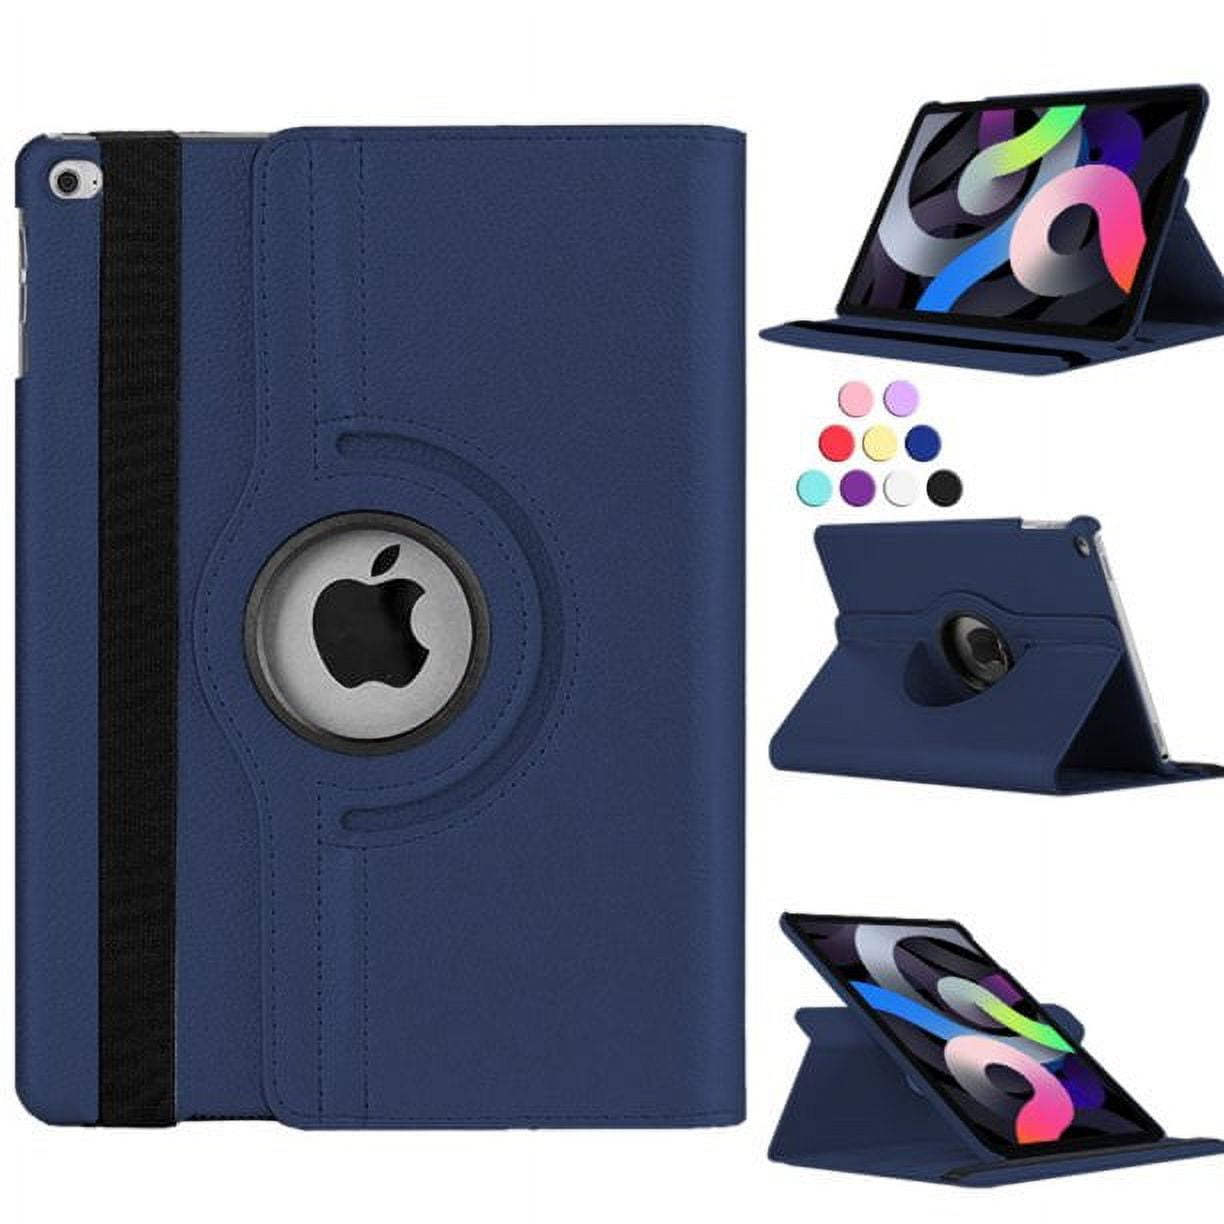 ProCase Smart Case for 2022 iPad 10th Generation Case with Pencil Holder,  Slim Stand Protective Folio Book Cover for iPad 10.9 inch 2022 A2696 A2757